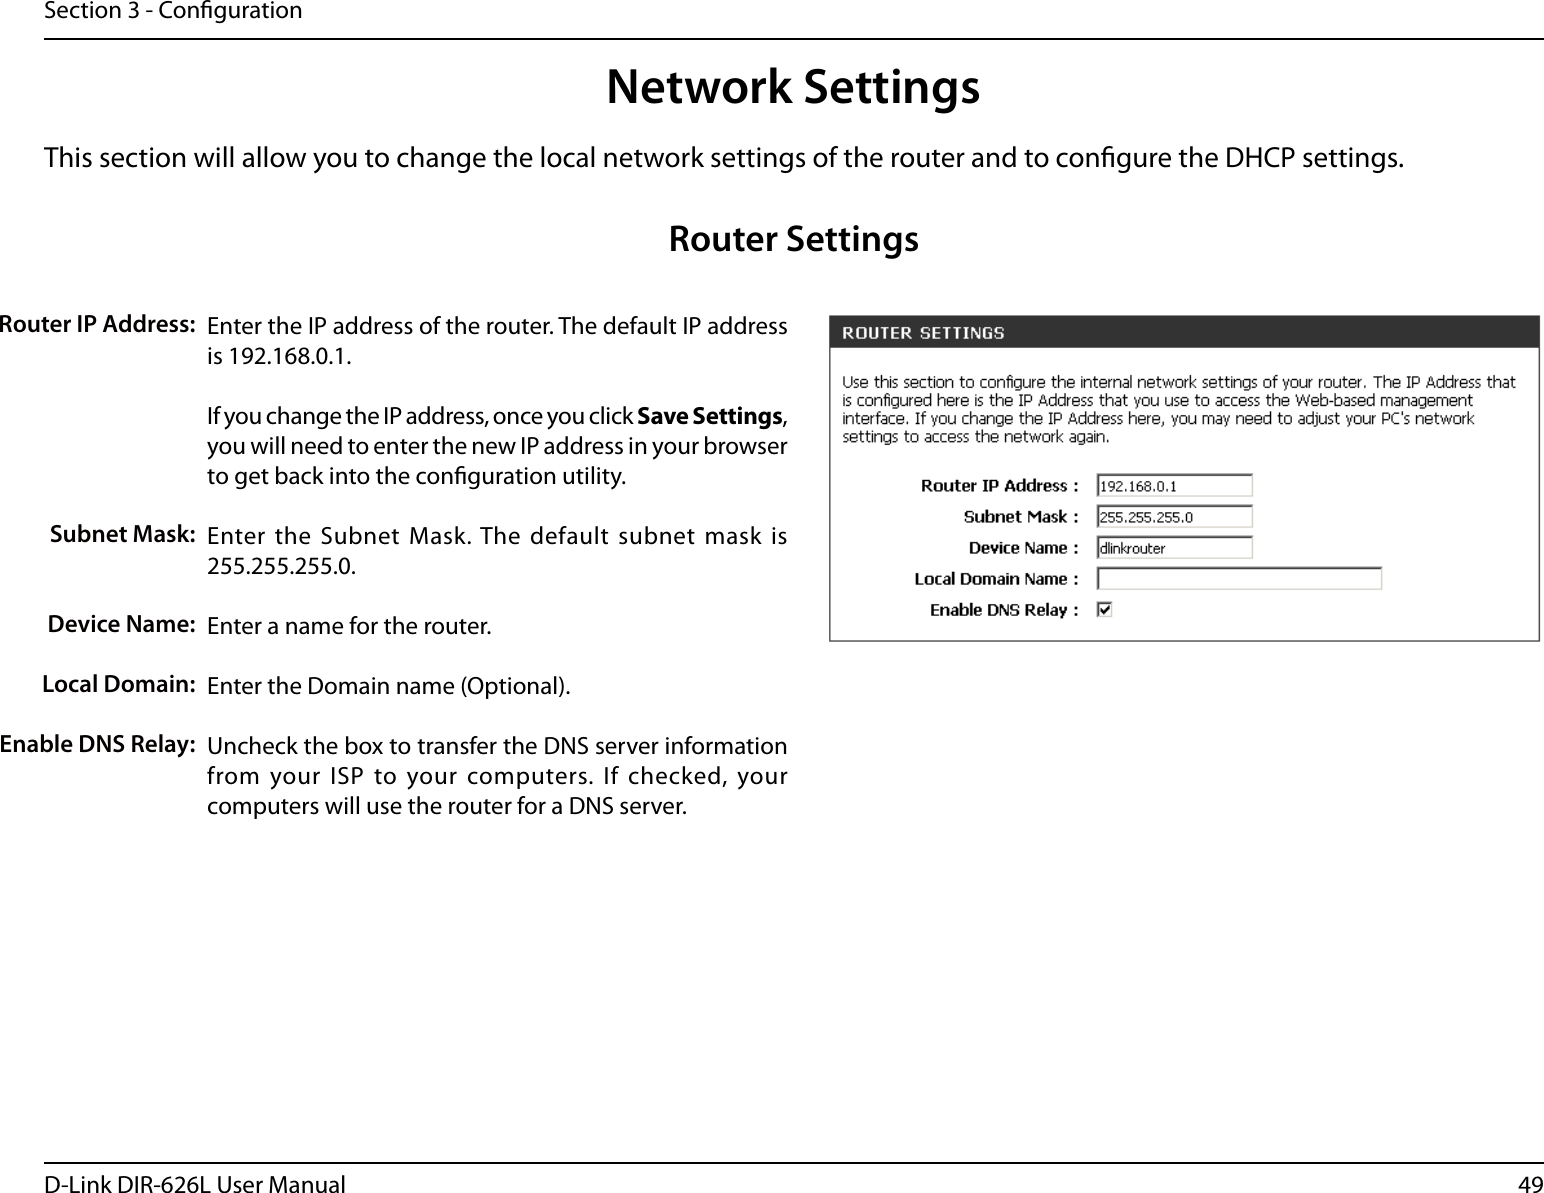 49D-Link DIR-626L User ManualSection 3 - CongurationThis section will allow you to change the local network settings of the router and to congure the DHCP settings.Network SettingsEnter the IP address of the router. The default IP address is 192.168.0.1.If you change the IP address, once you click Save Settings, you will need to enter the new IP address in your browser to get back into the conguration utility.Enter the Subnet  Mask. The  default subnet mask  is 255.255.255.0.Enter a name for the router.Enter the Domain name (Optional).Uncheck the box to transfer the DNS server information from your ISP to your computers. If  checked, your computers will use the router for a DNS server.Router IP Address:Subnet Mask:Device Name:Local Domain:Enable DNS Relay:Router Settings